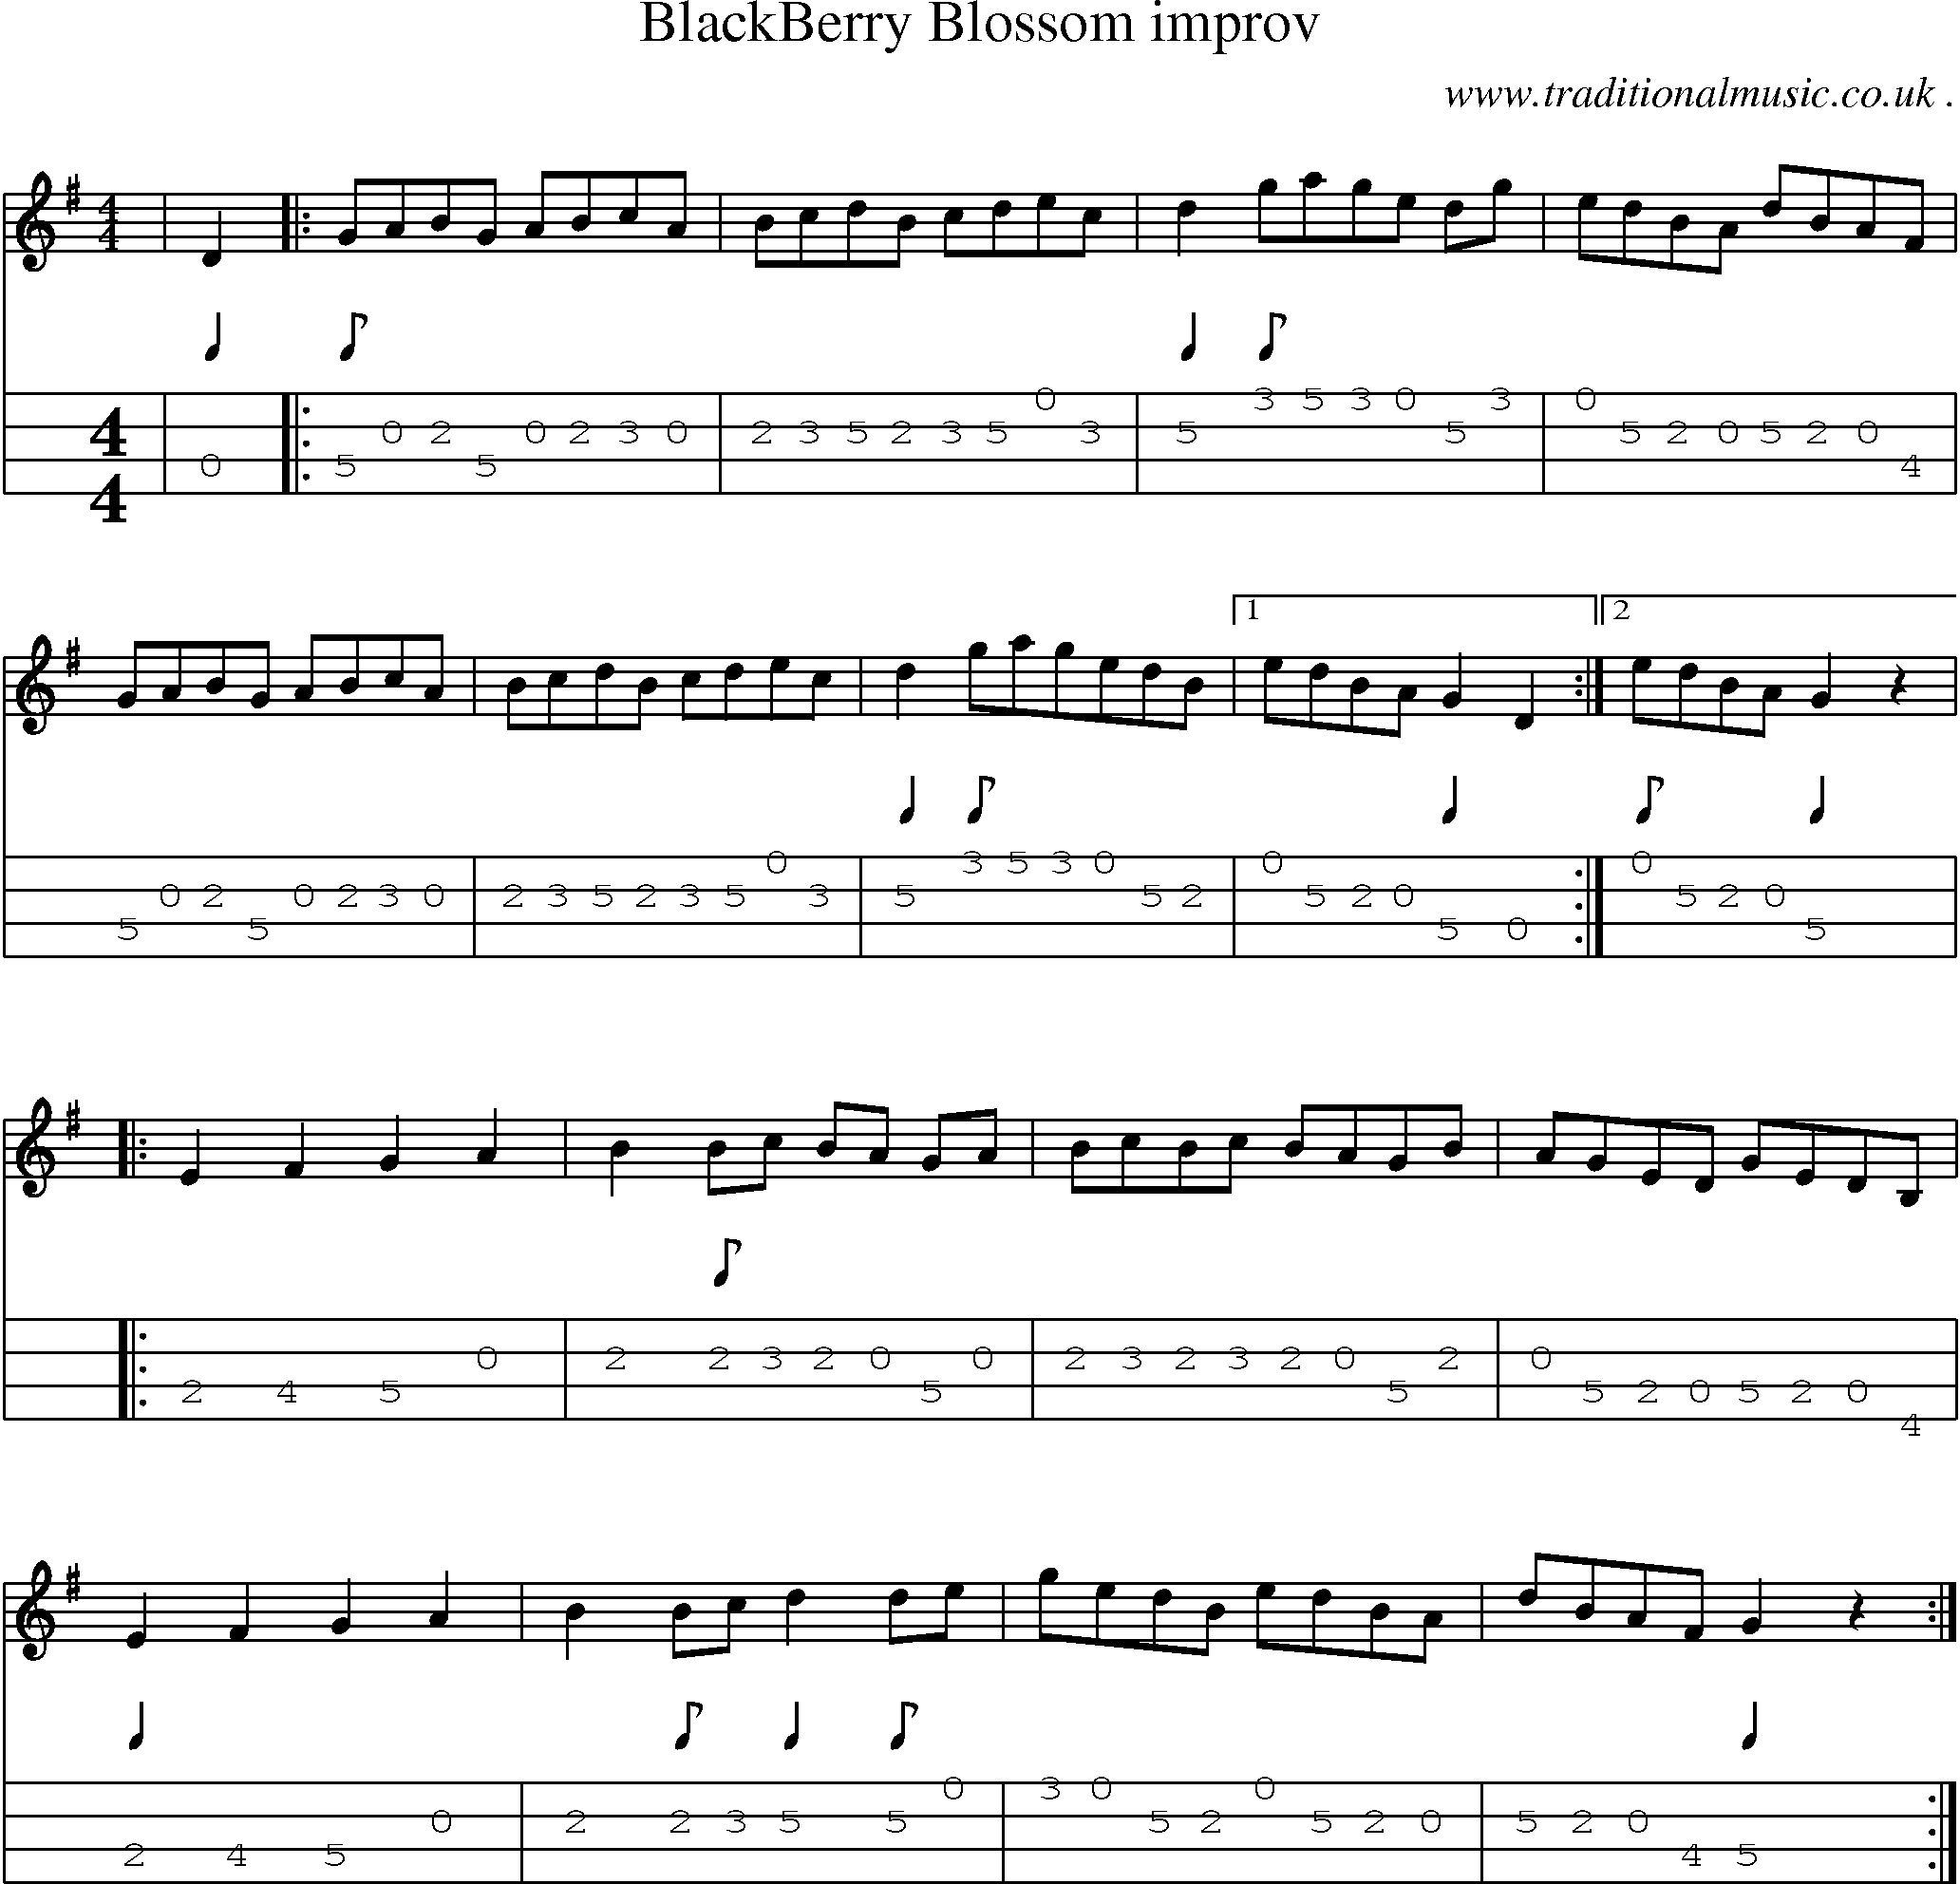 Music Score and Guitar Tabs for Blackberry Blossom Improv